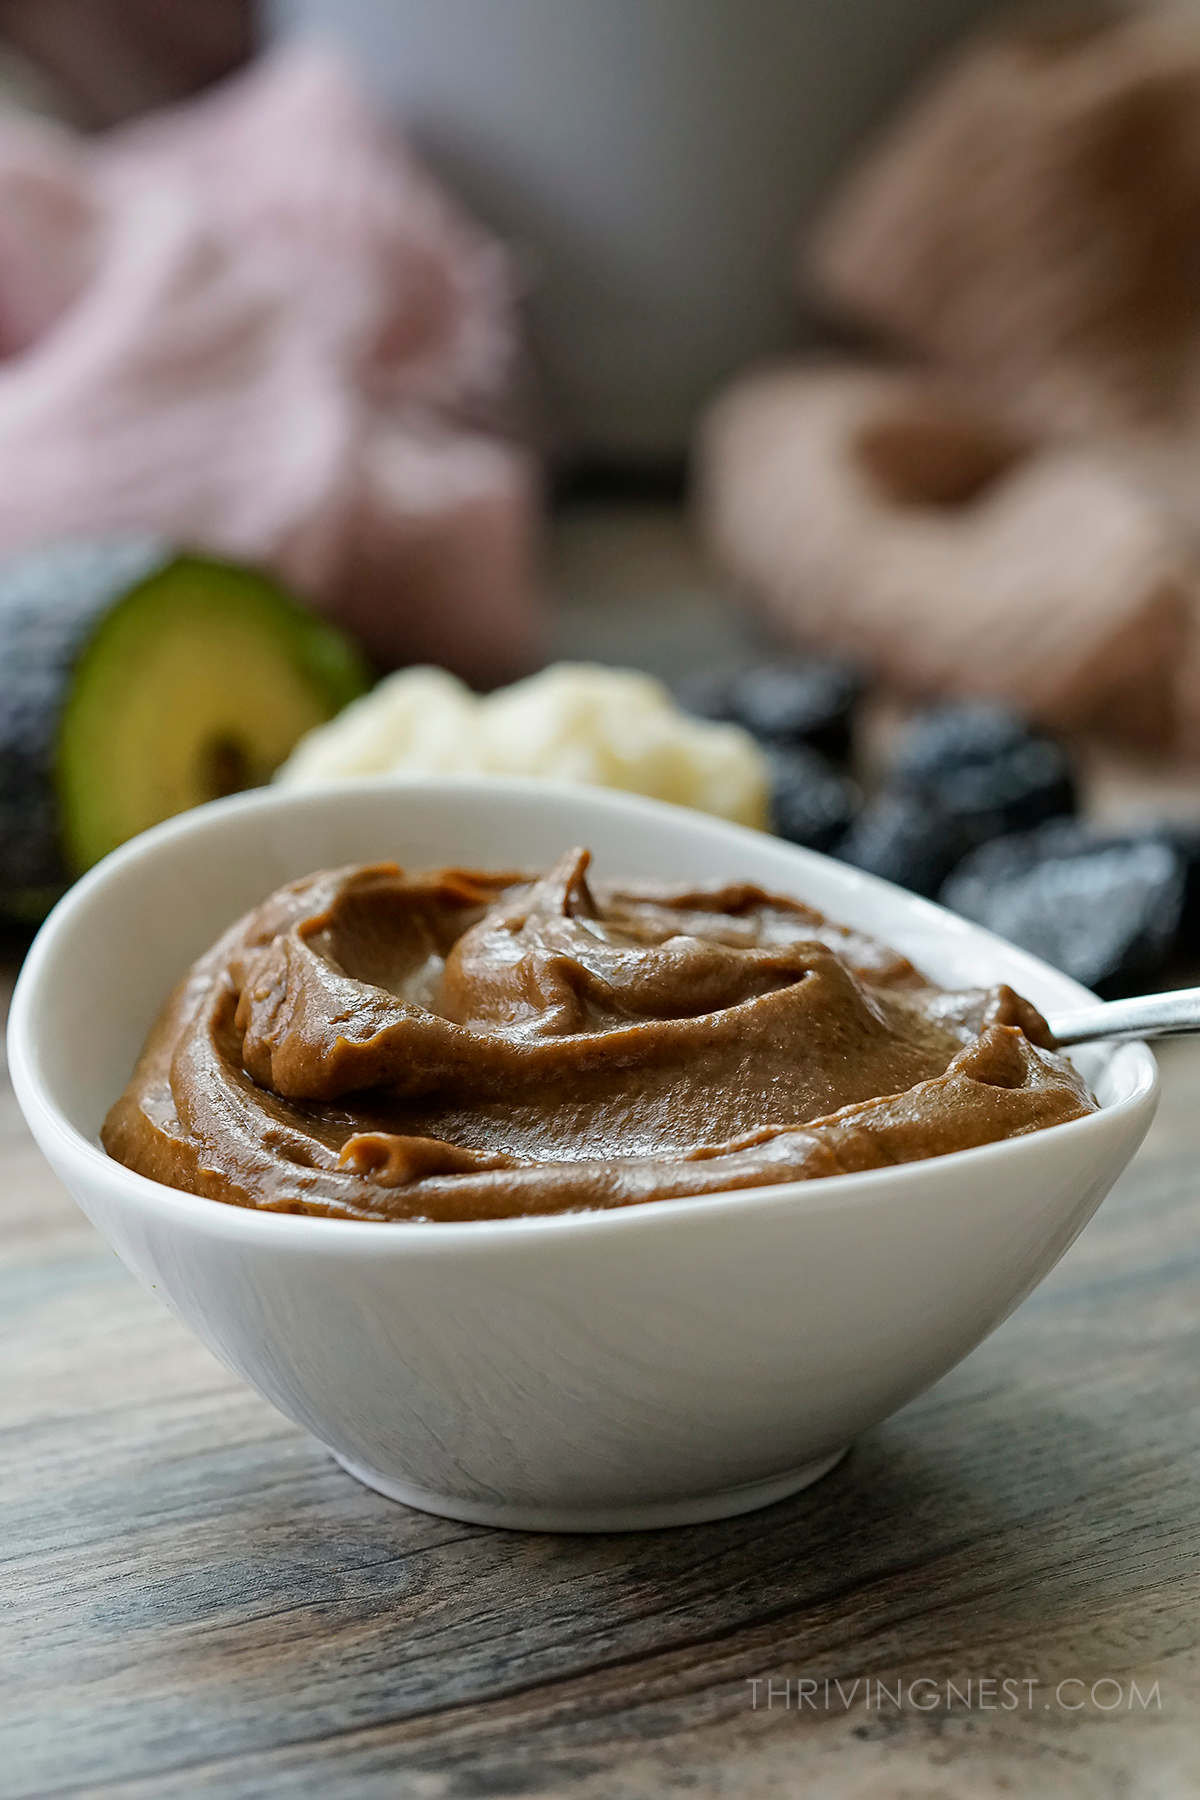 Cauliflower avocado prune puree combination as stage 2 baby food great for constipation.